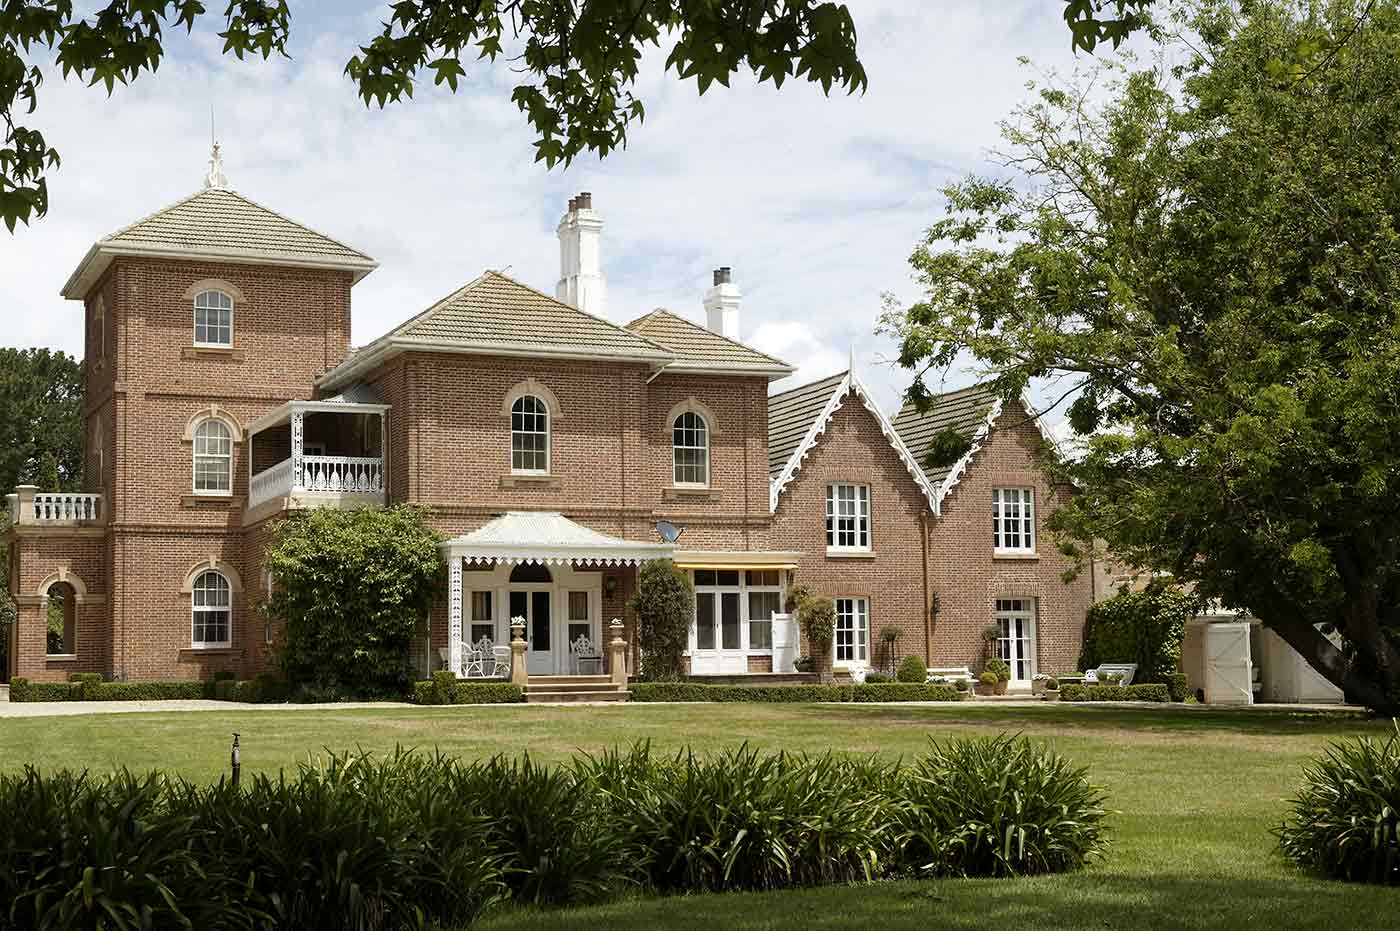 Colour photograph showing part of a large, two-storey brick house with tower, white chimneys and extensive gardens.